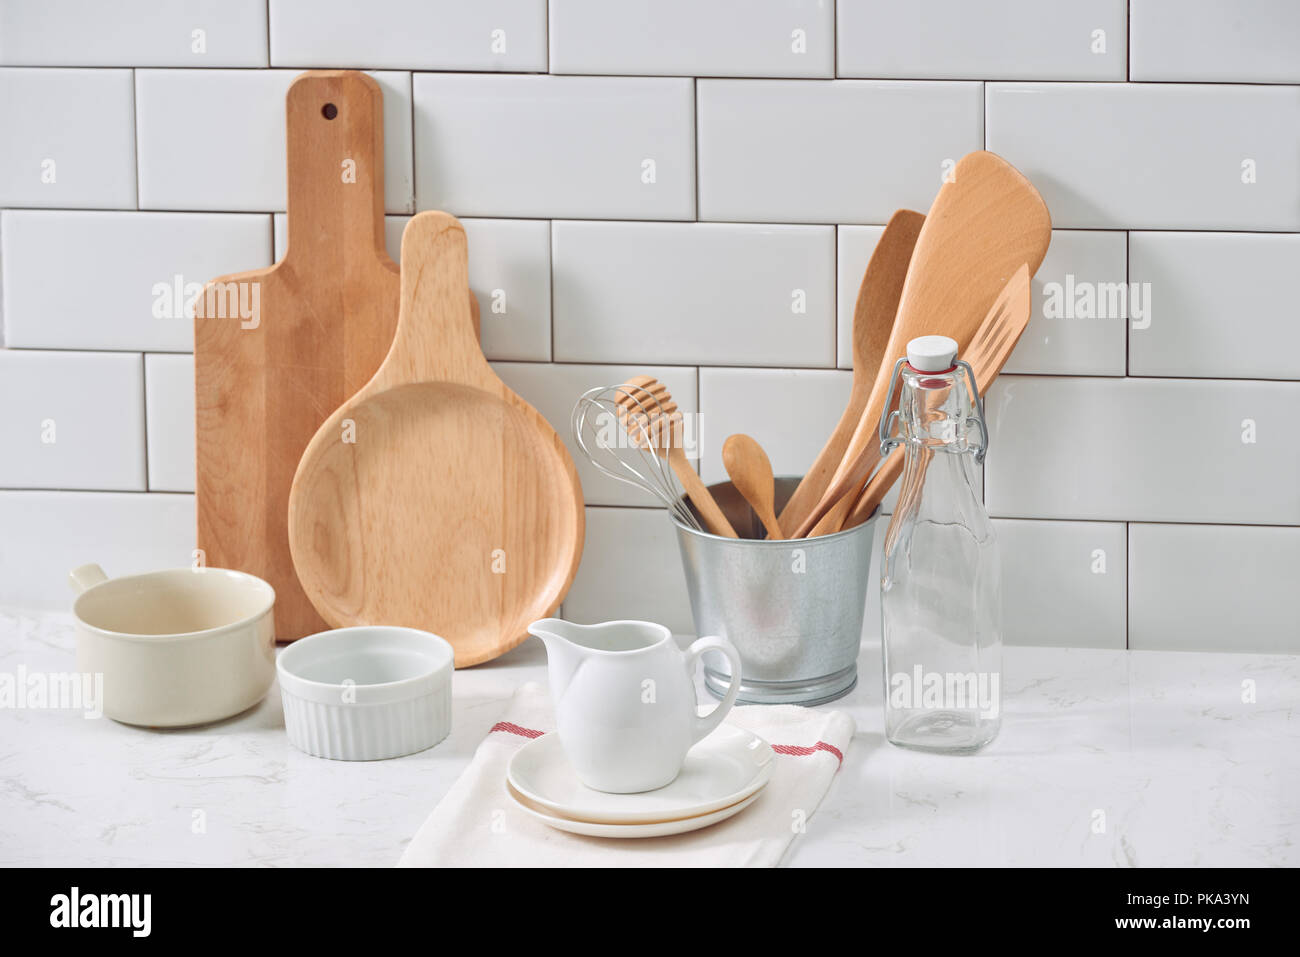 Simple rustic kitchenware against white wooden wall: rough ceramic pot with wooden cooking utensil set, stacks of ceramic bowls, jug and wooden trays. Stock Photo